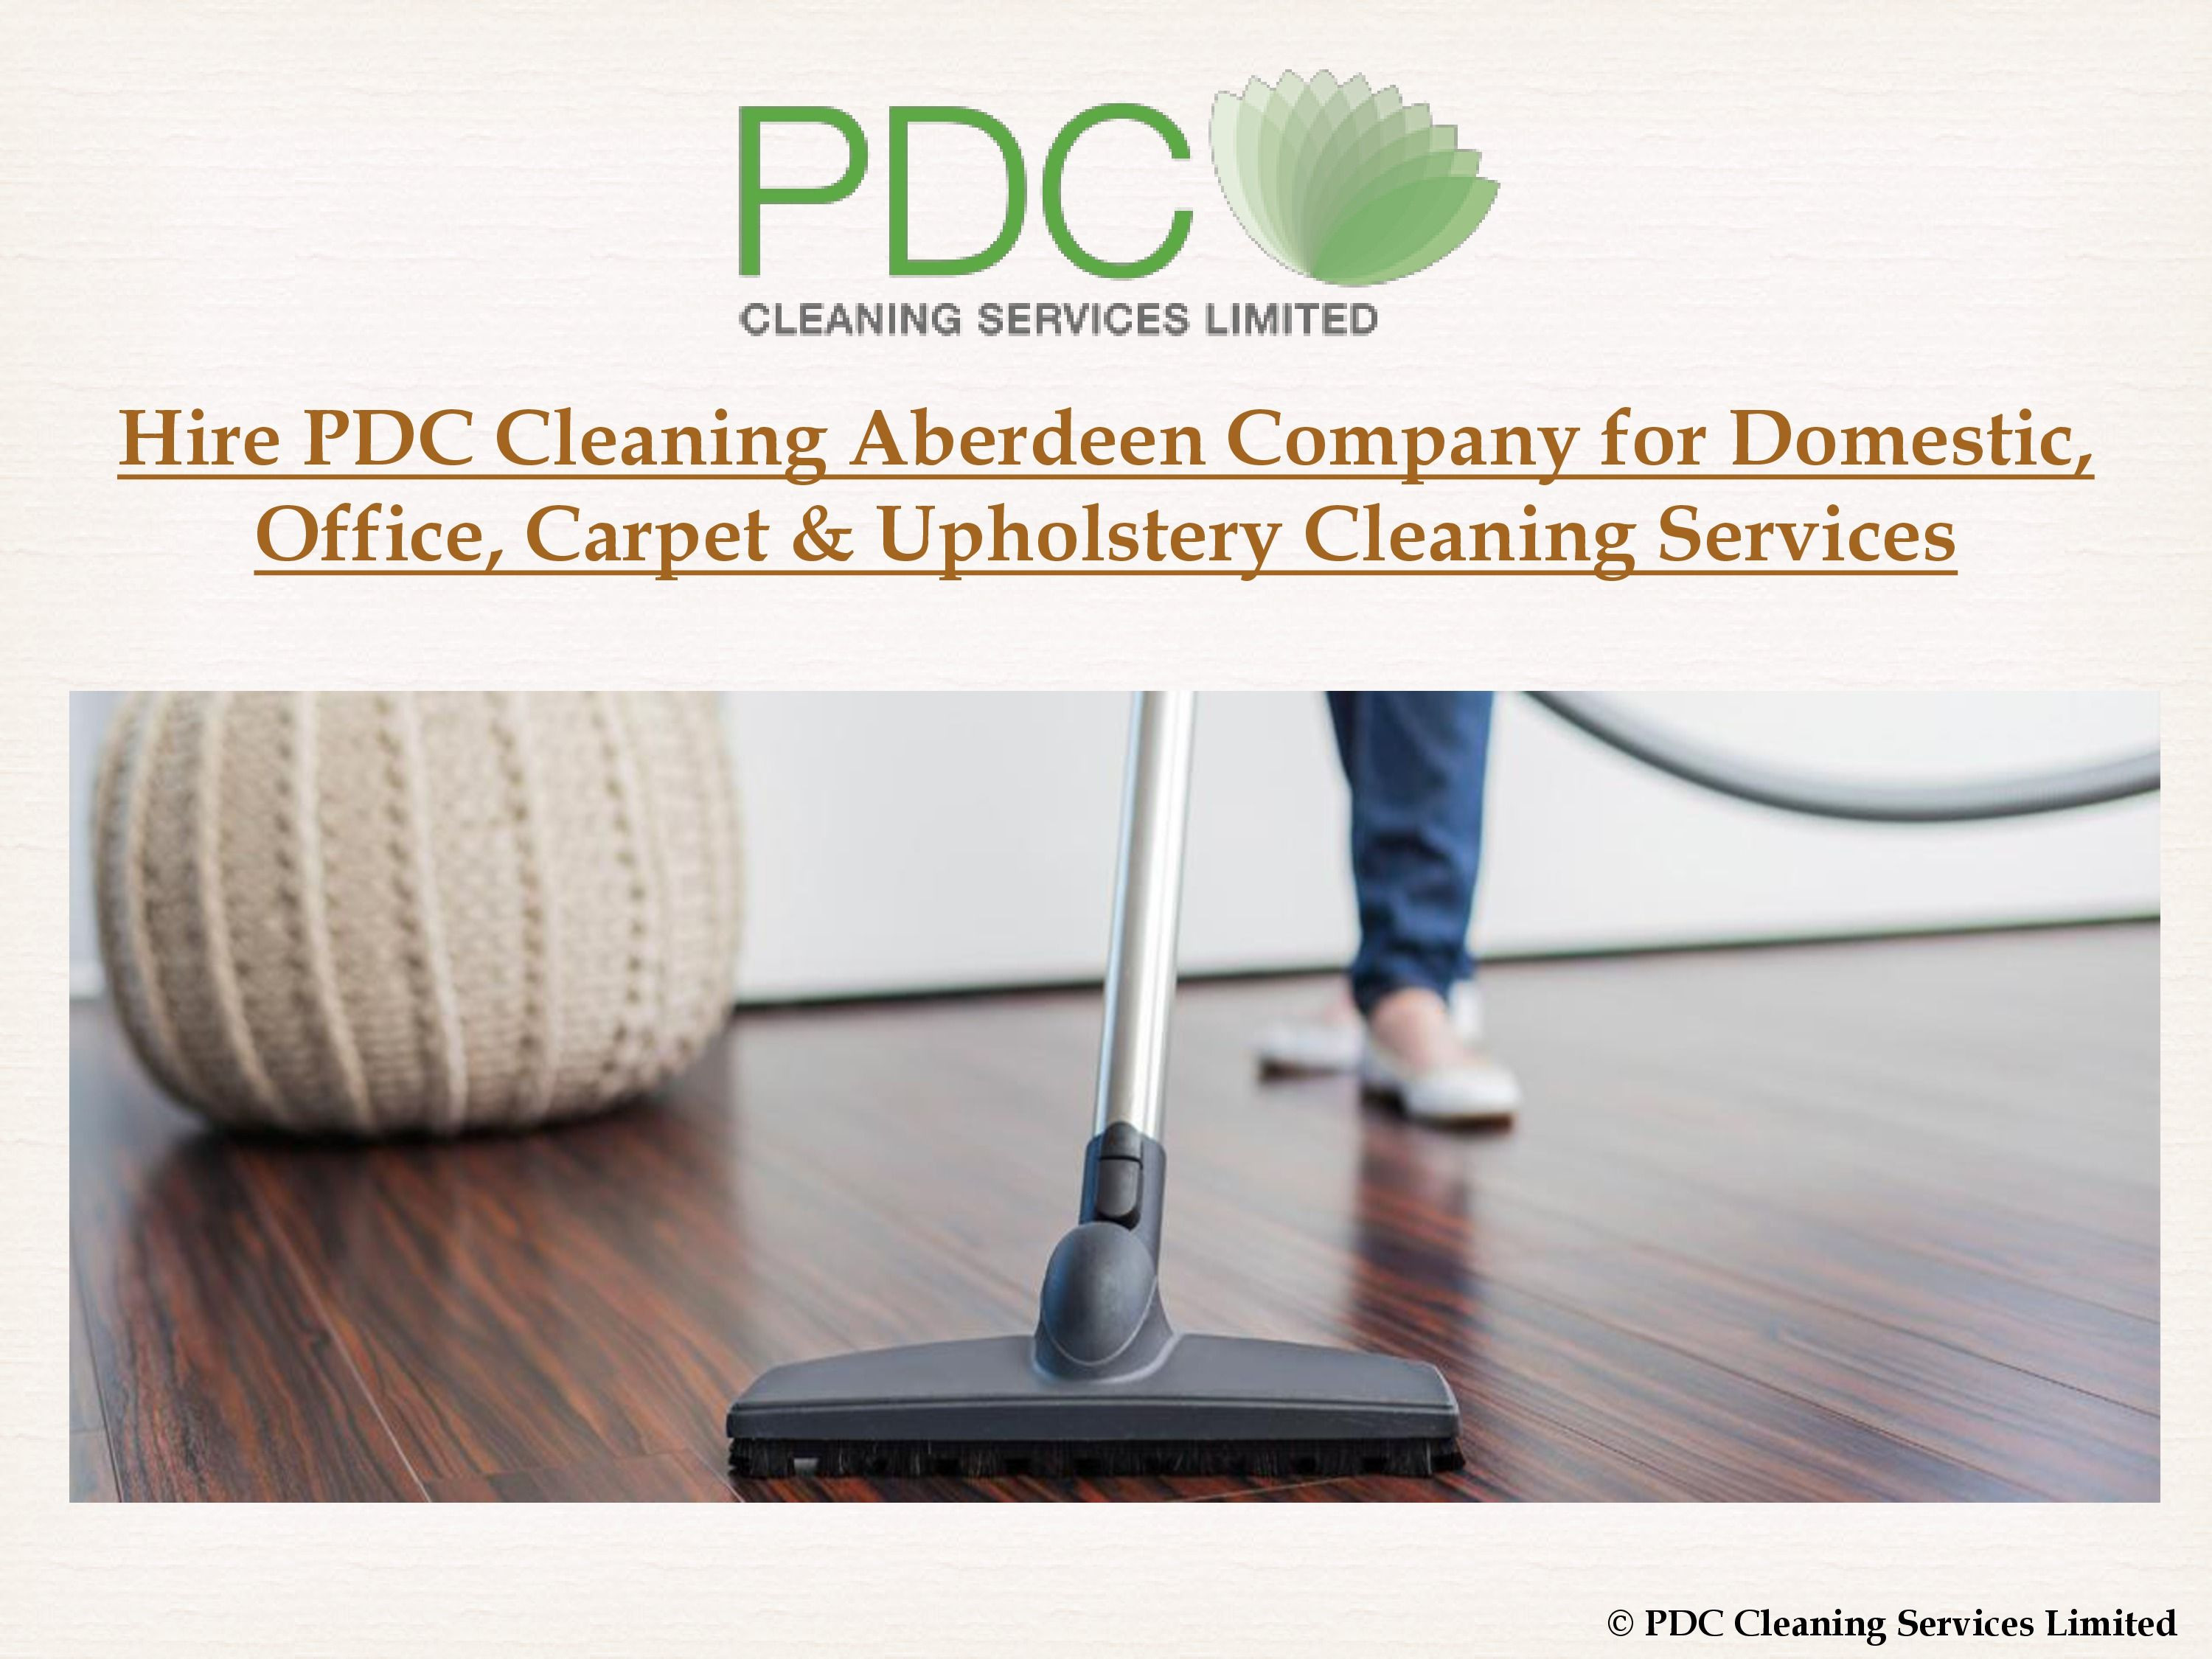 21 Famous Hardwood Floor Cleaning Companies 2024 free download hardwood floor cleaning companies of cheap and best cleaning services in aberdeen united kingdom are you throughout best professional home cleaning services offers carpet cleaning upholstery